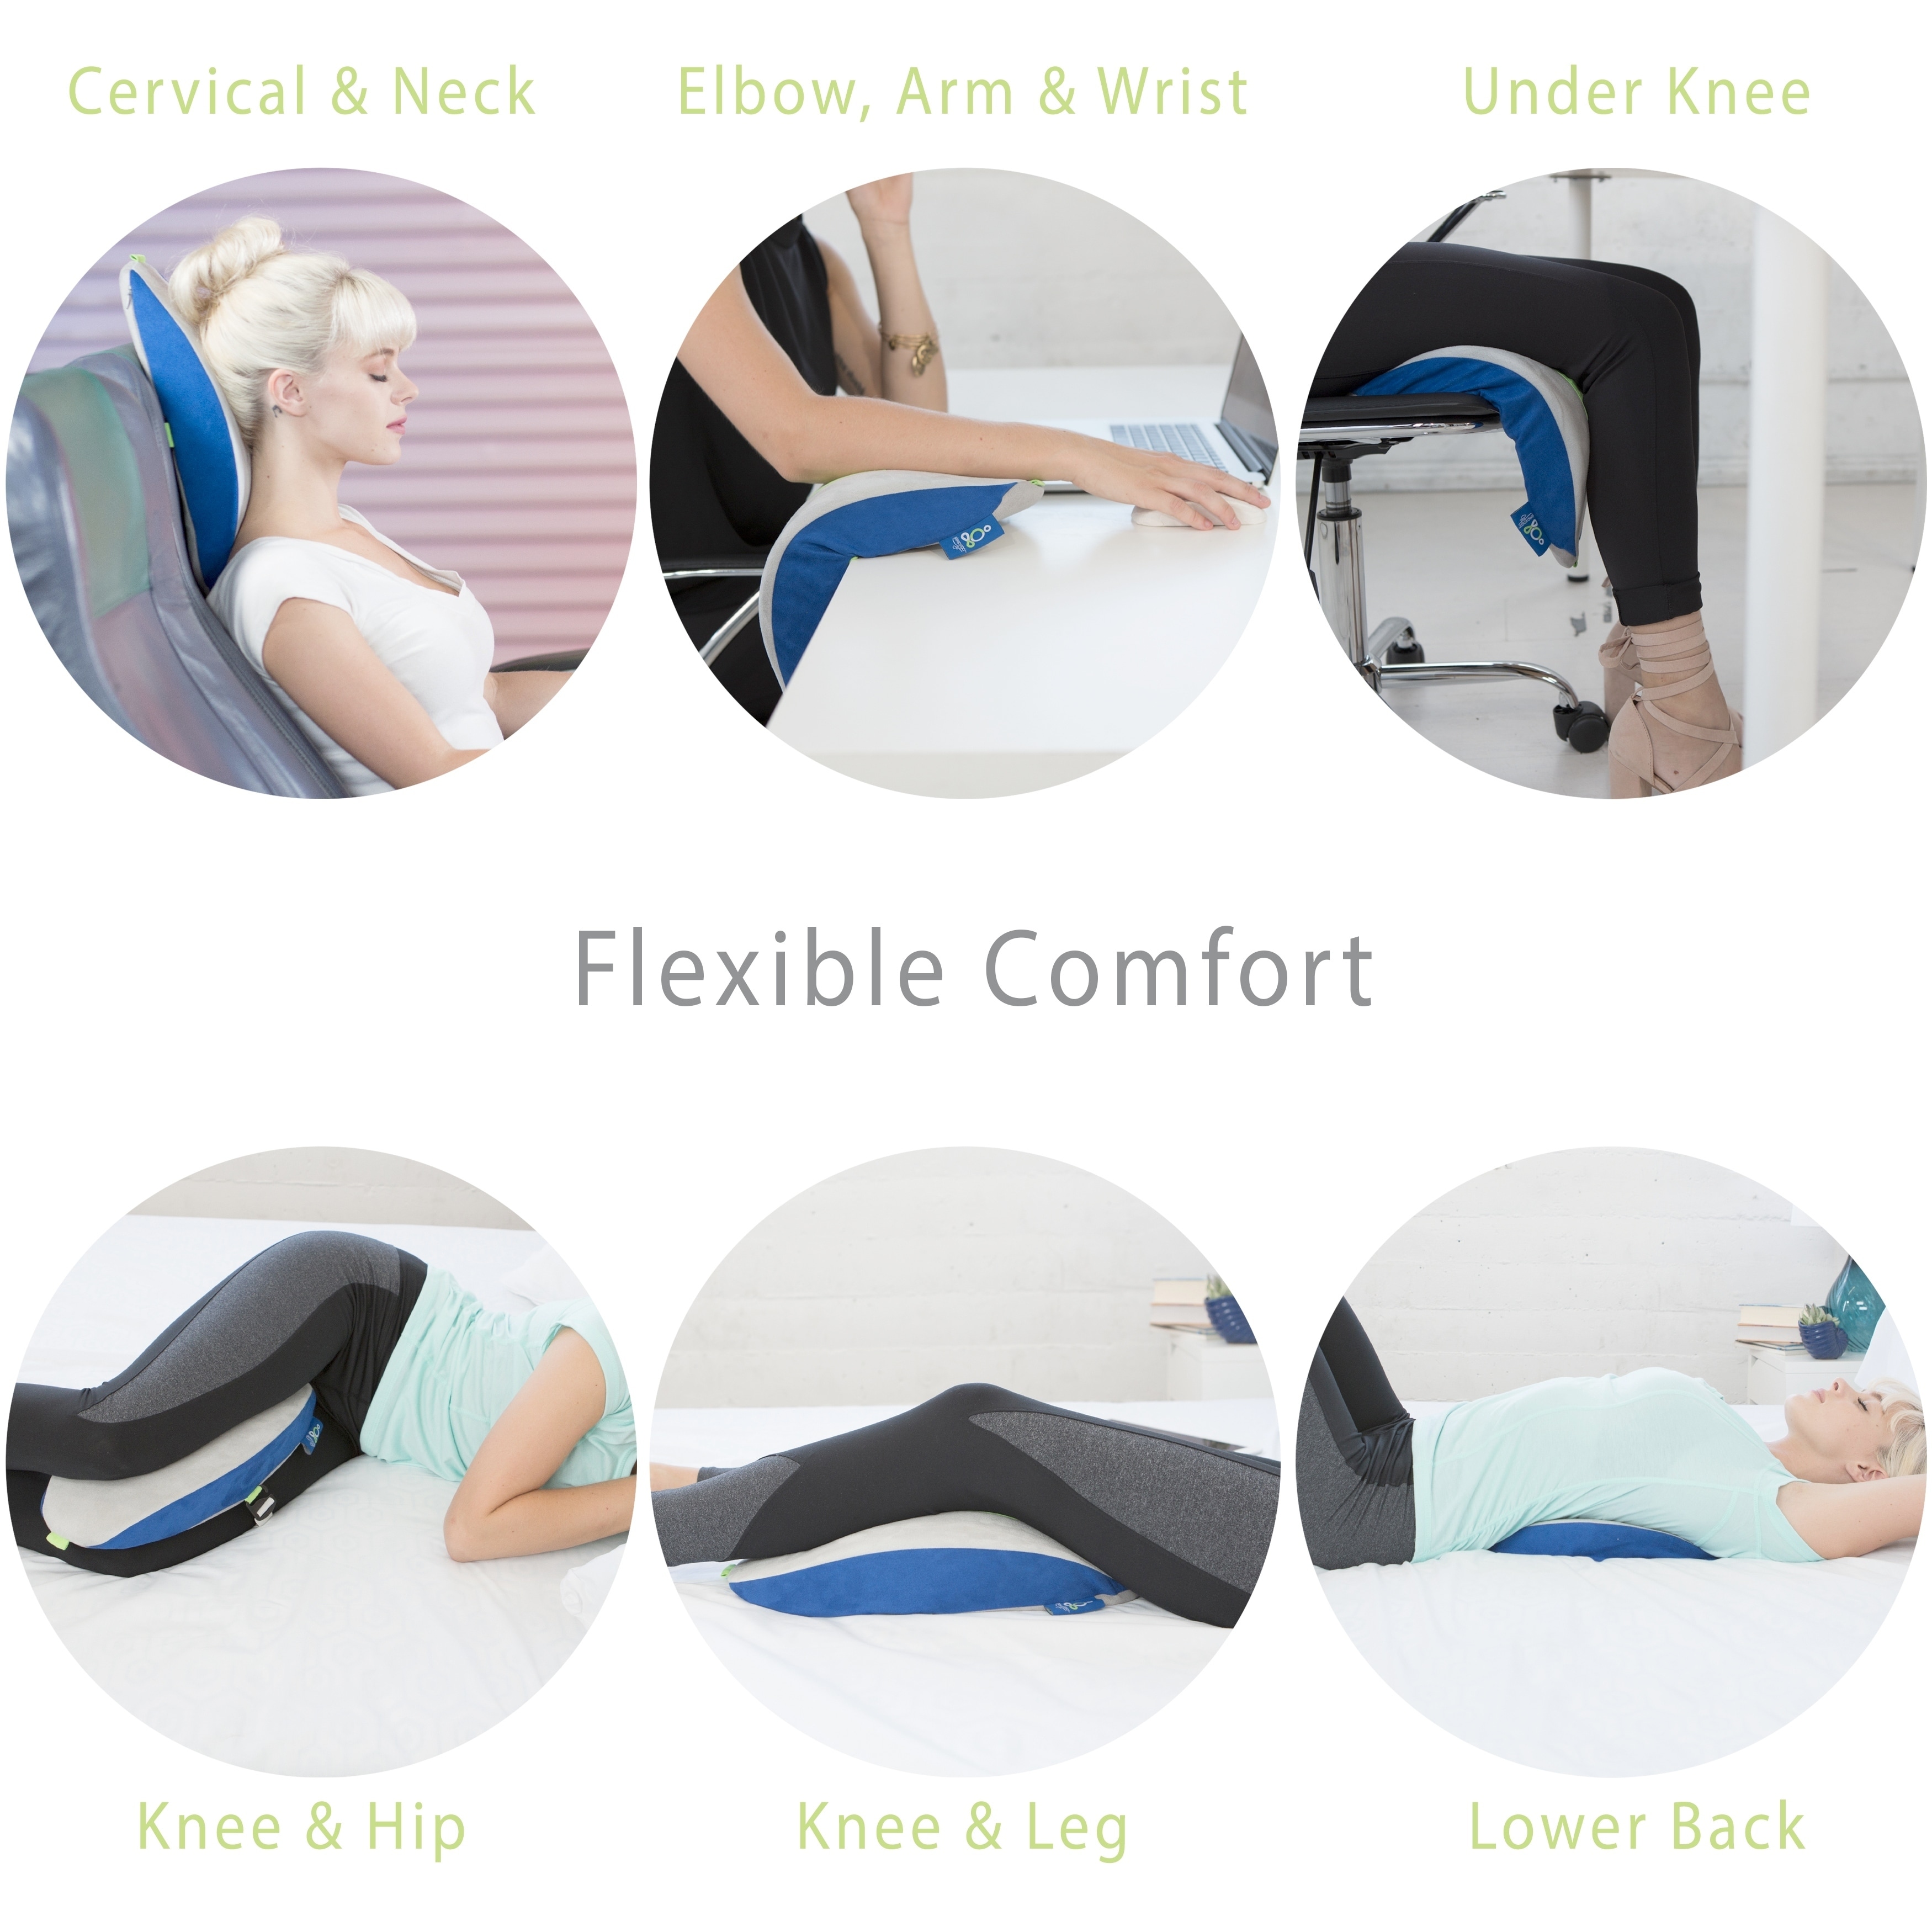 https://ak1.ostkcdn.com/images/products/21830177/Sleep-Yoga-GO-Posture-Pillow-for-Home-or-Travel-Customizable-lumbar-and-neck-stretch-and-support-improve-posture-440f0ad5-76aa-4f70-b253-6aef08571bbb.jpg